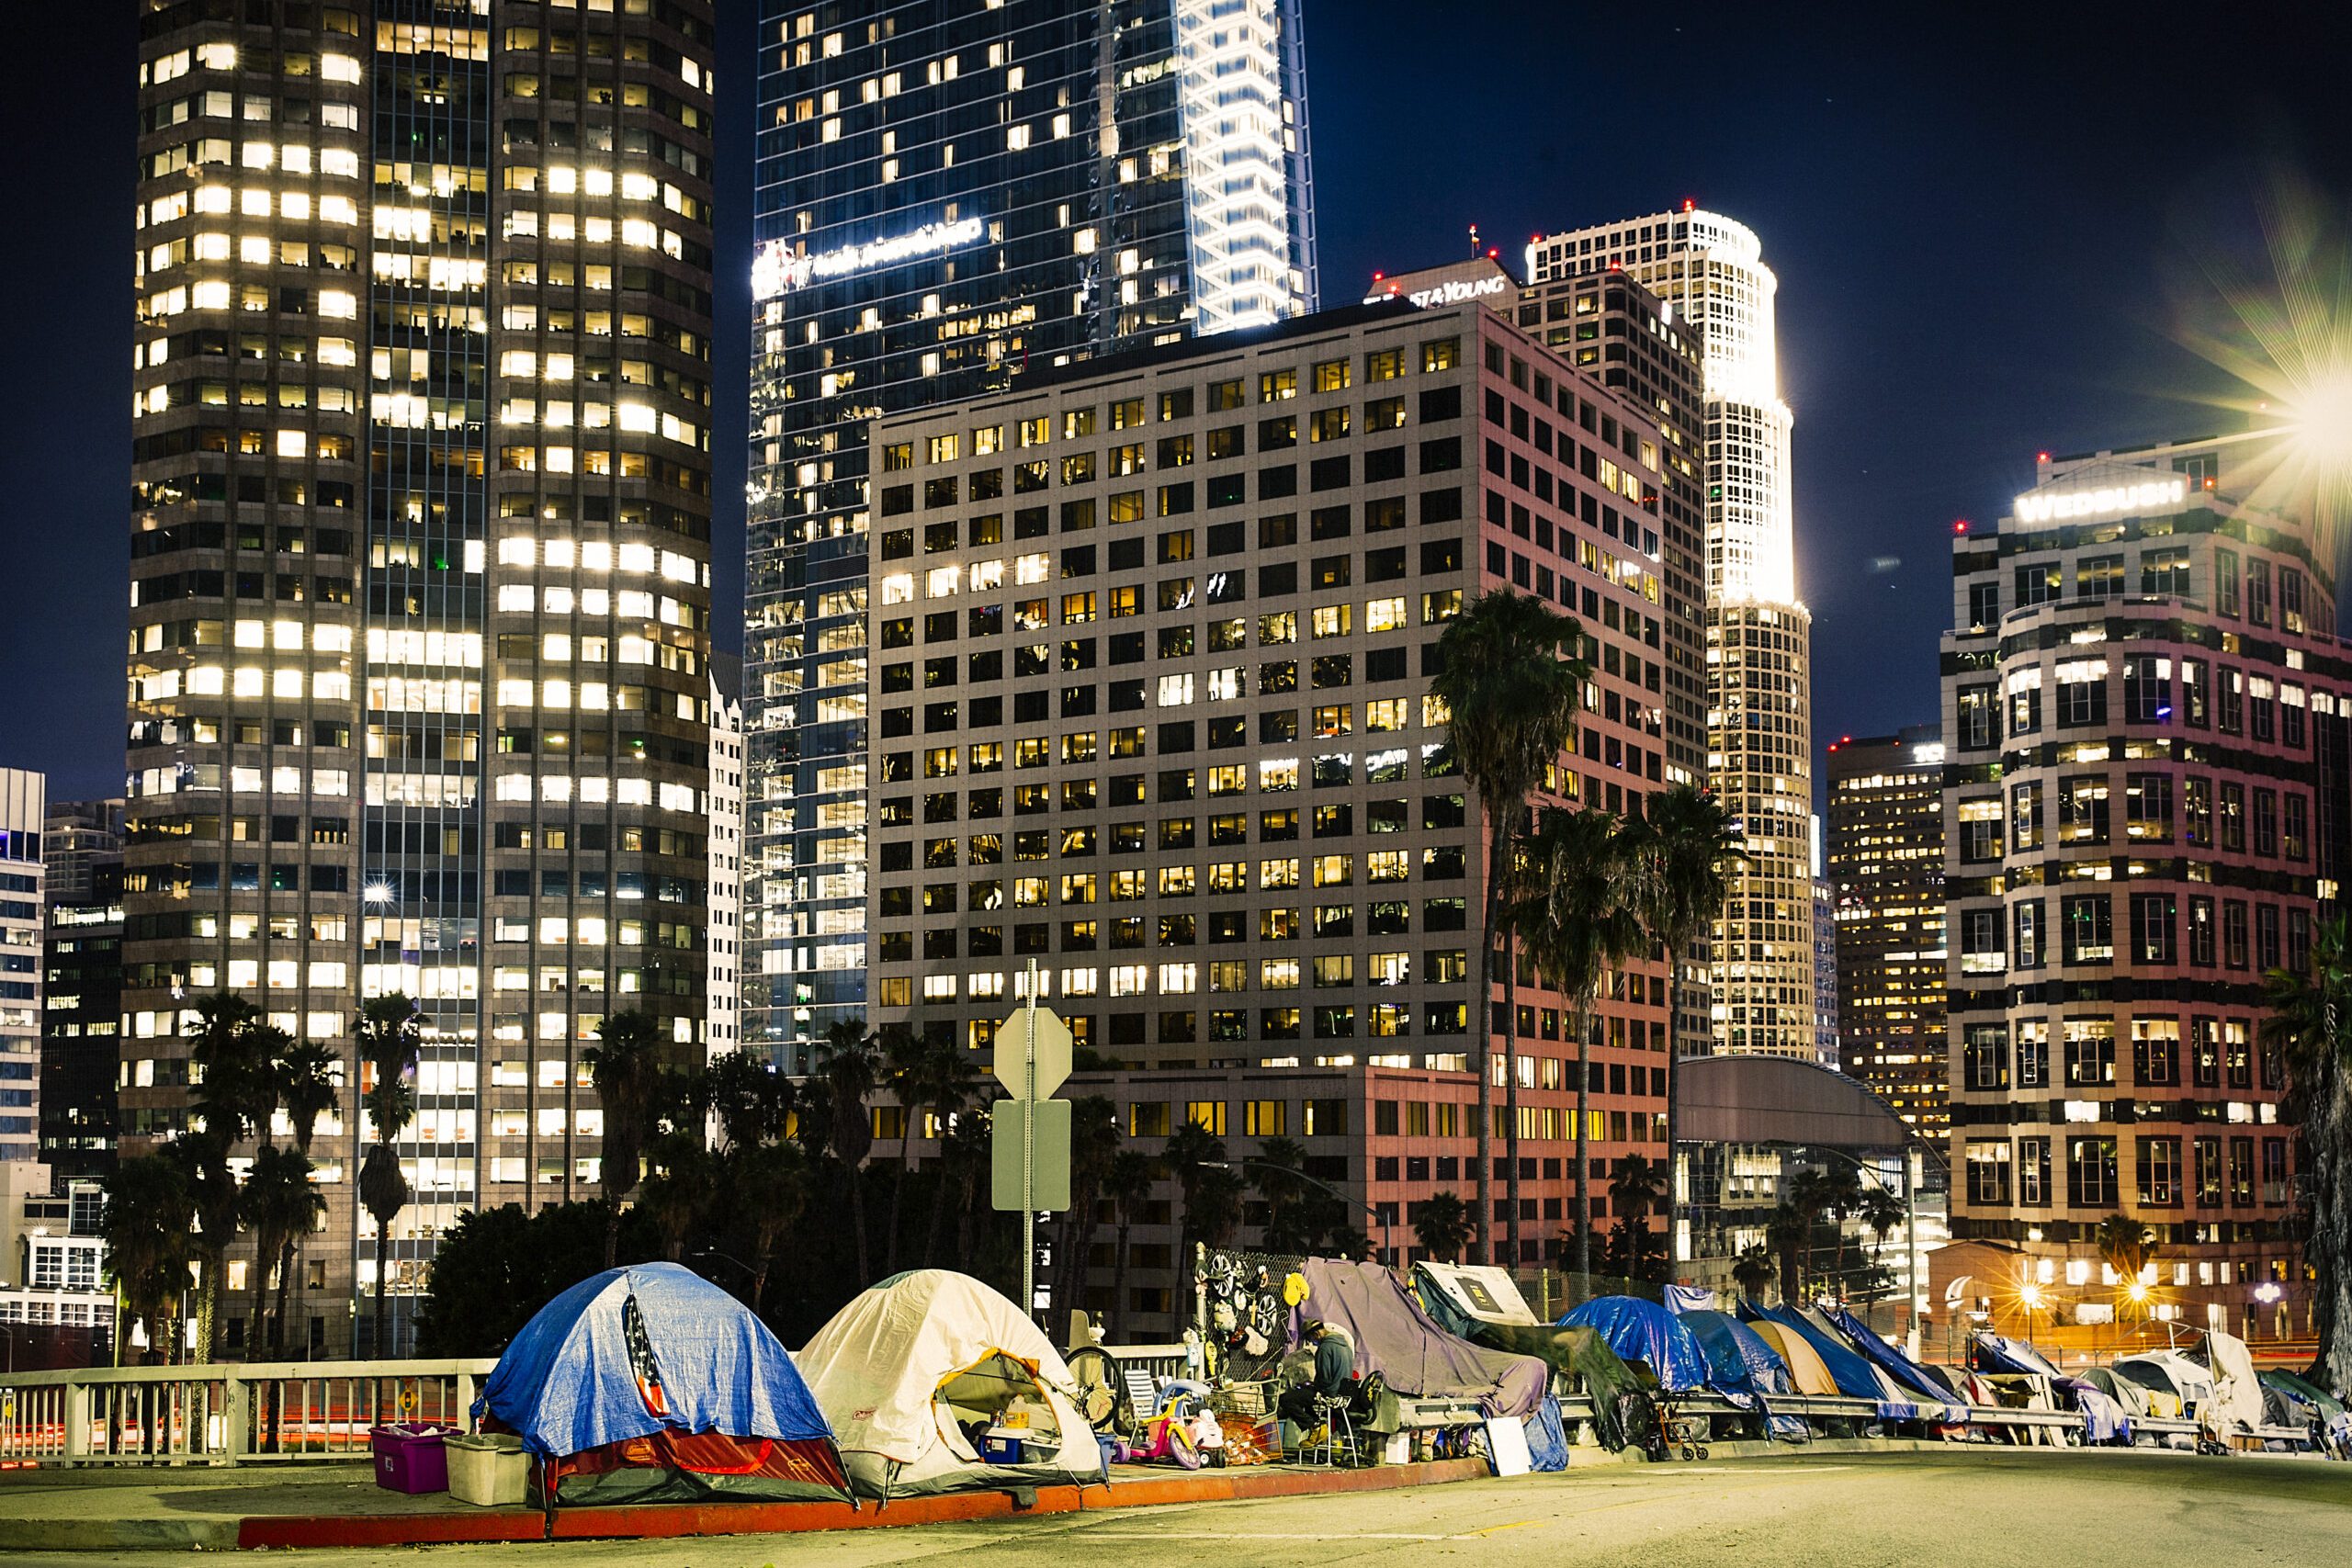 Los Angeles, CA, USA - September 2018:  View of homeless people tents near the highway in LA Downtown with skyscrapers.